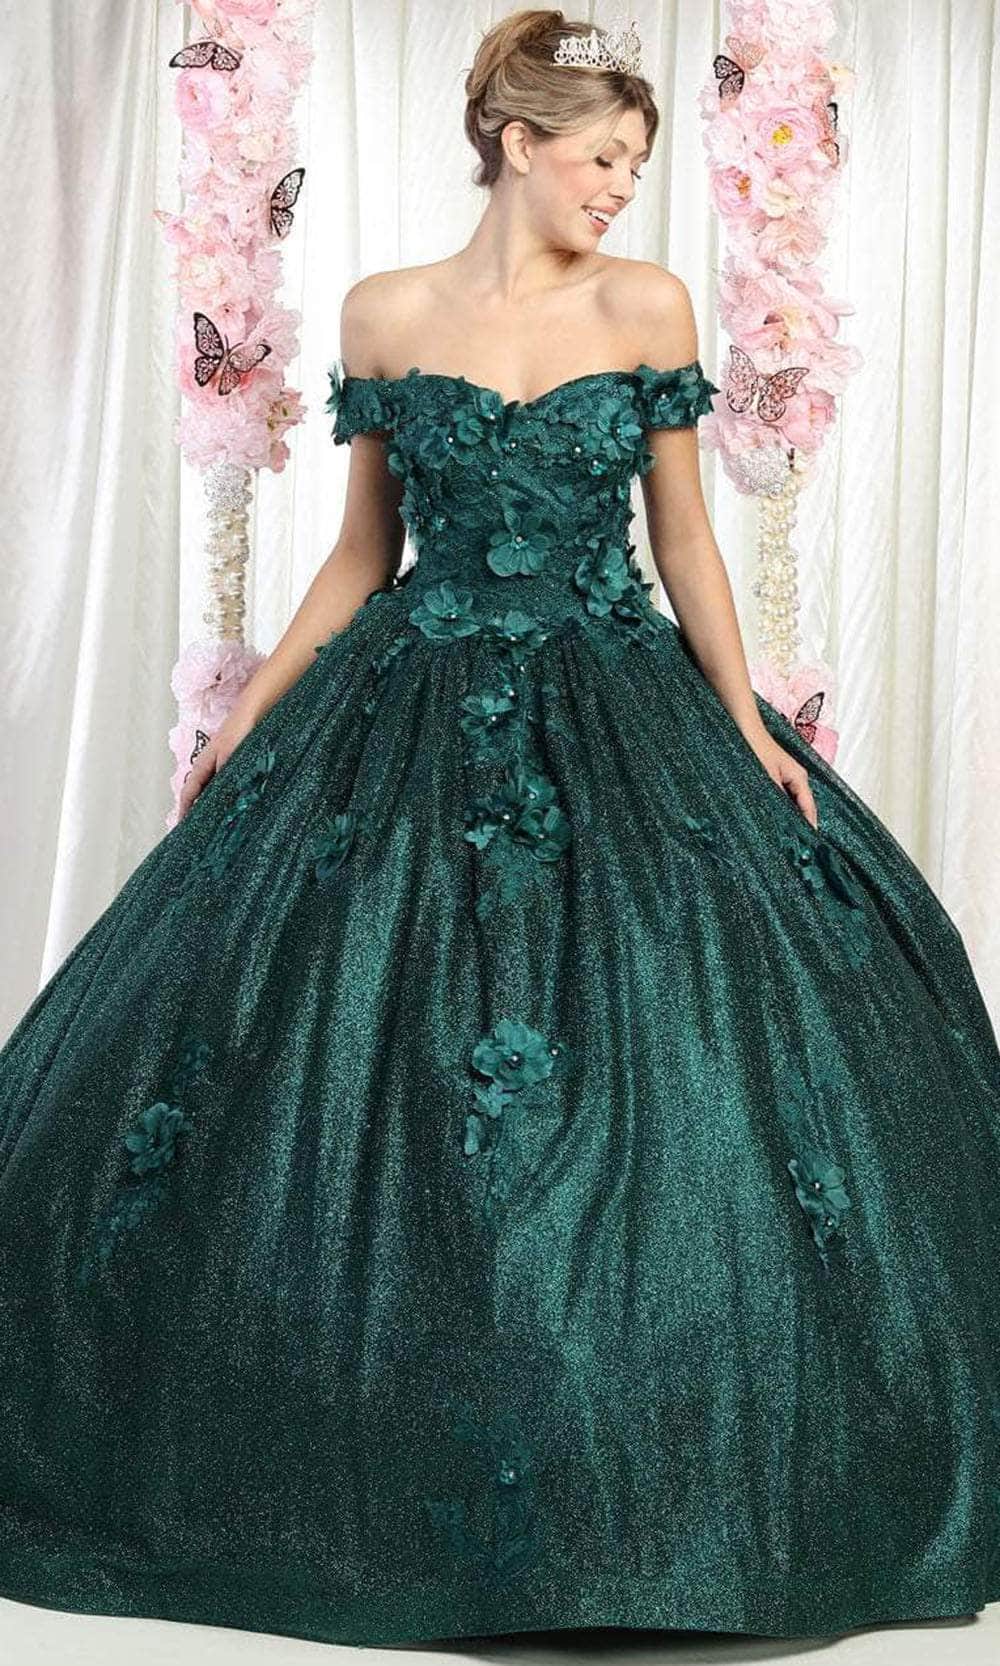 May Queen LK161 - Off Shoulder Floral Prom Ballgown Ball Gowns